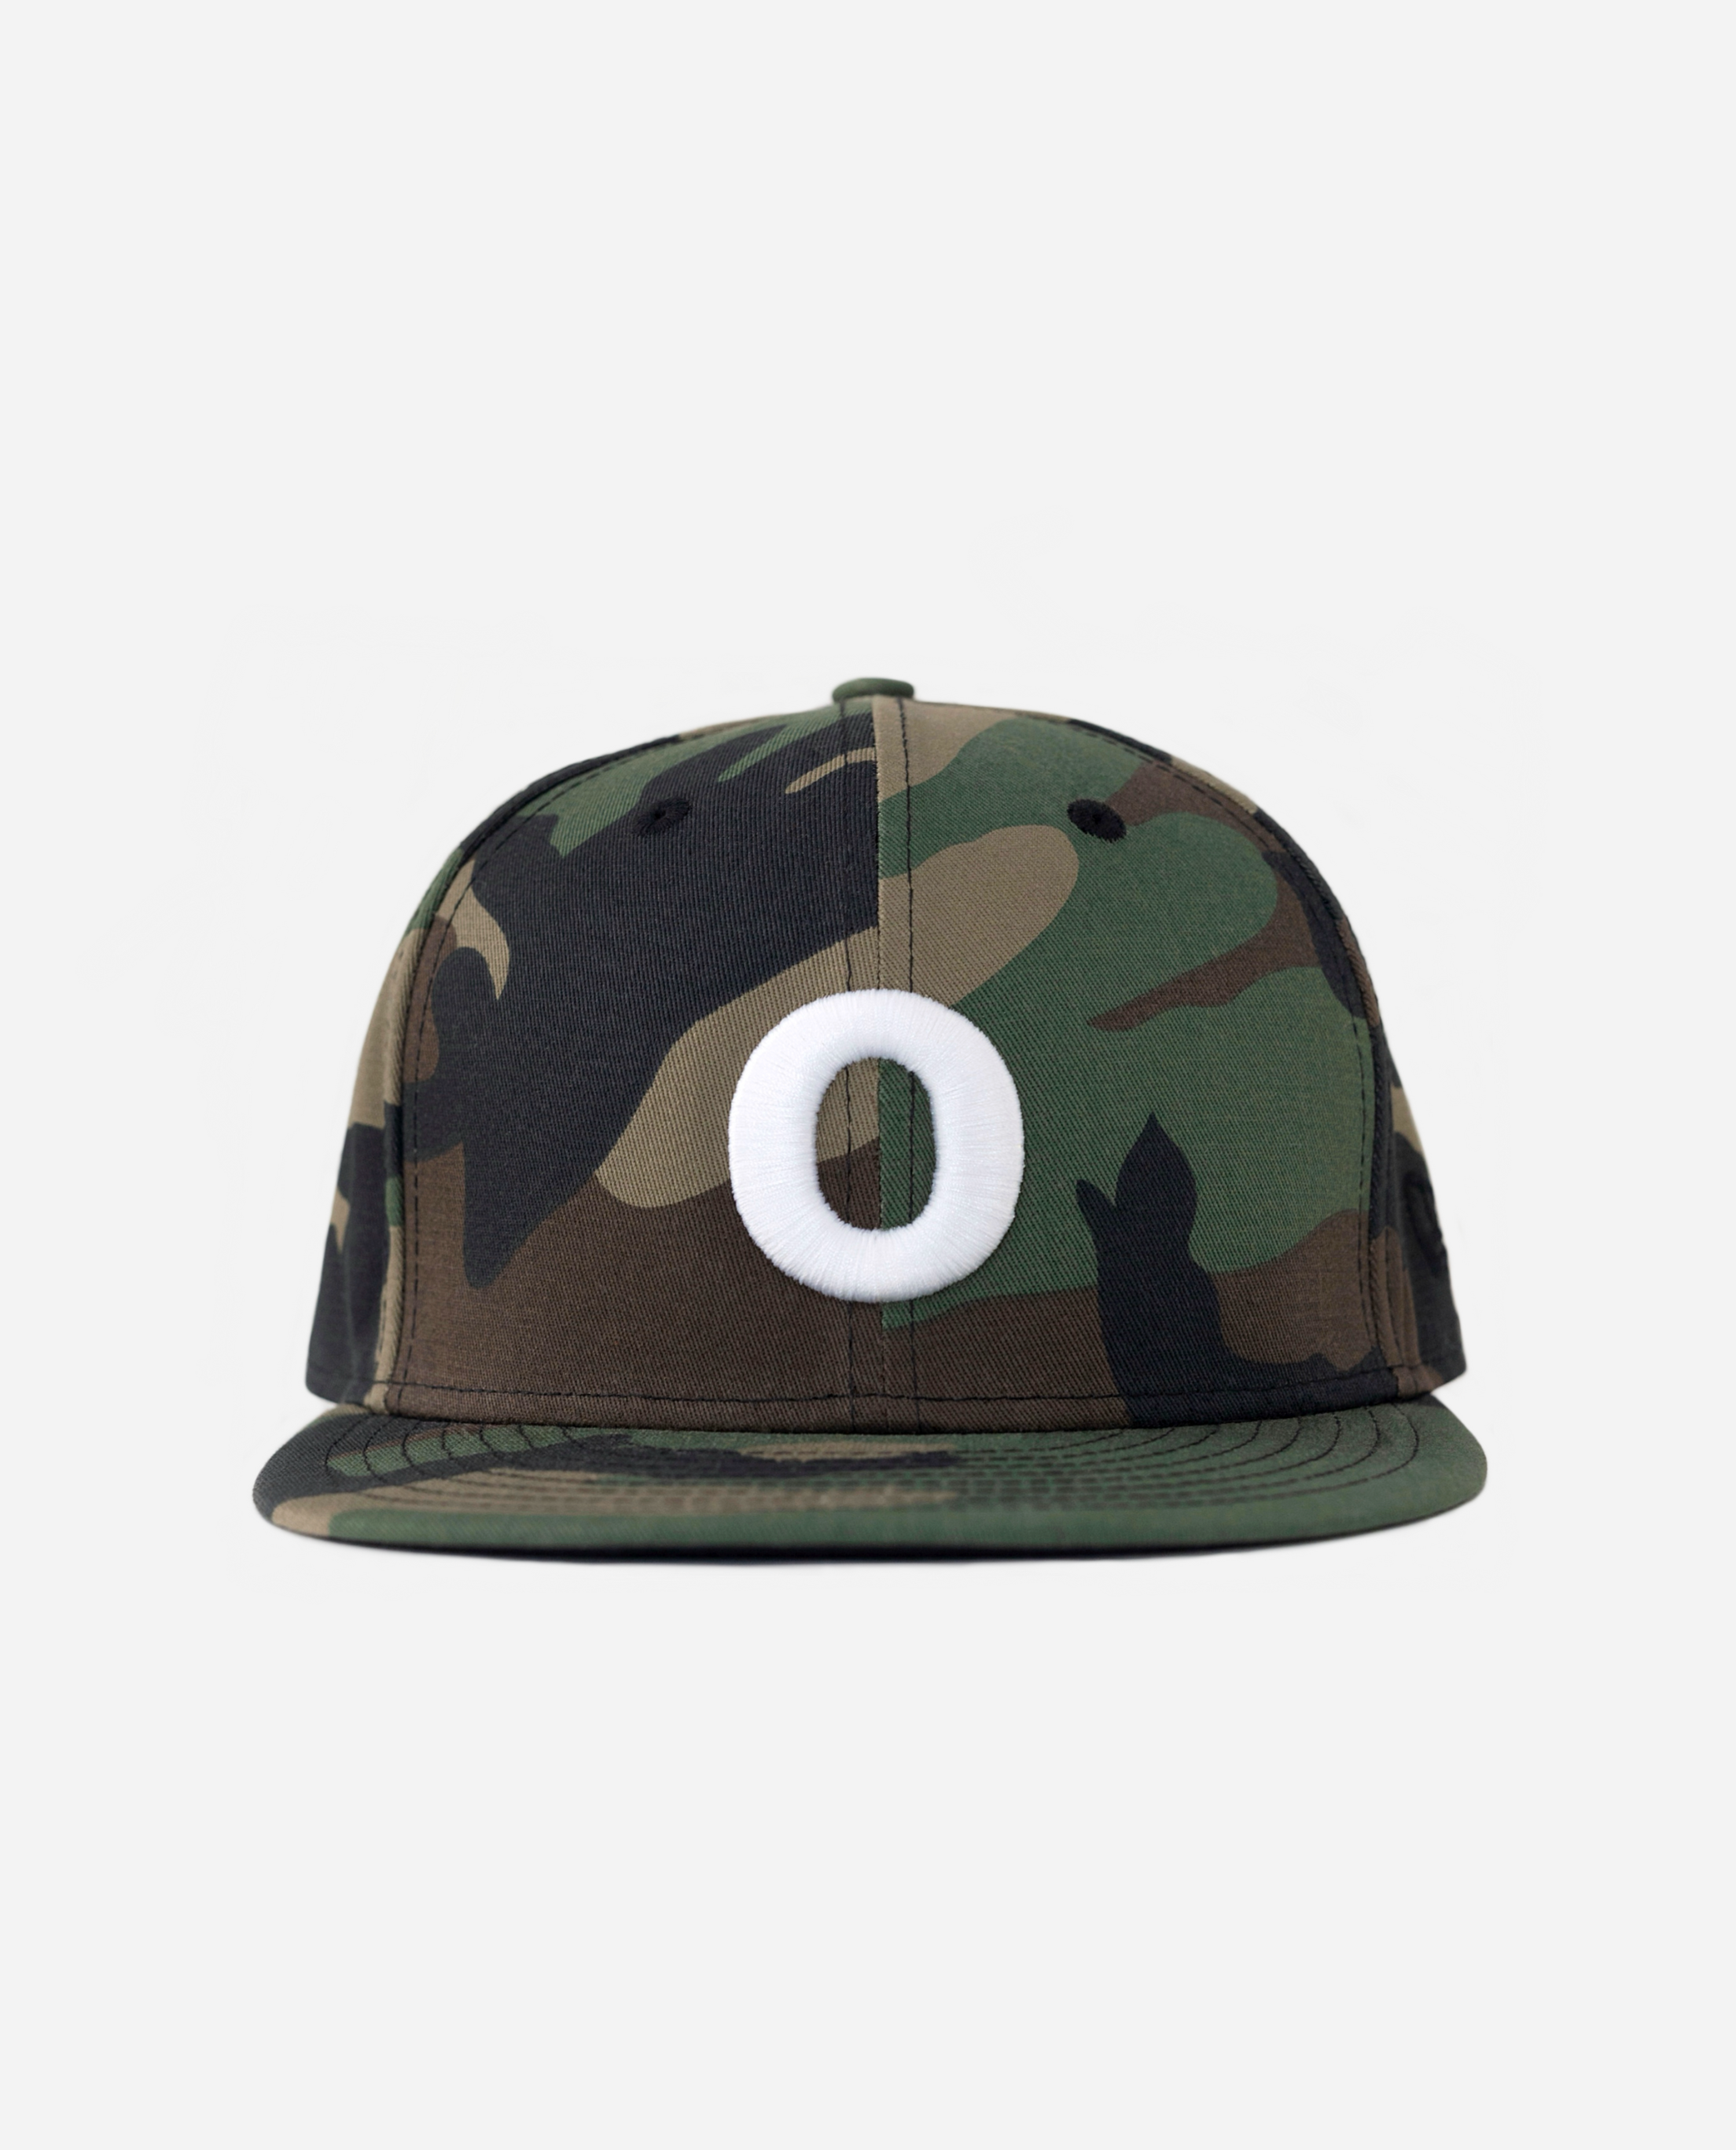 oMA LOGO FITTED HAT (CAMO)